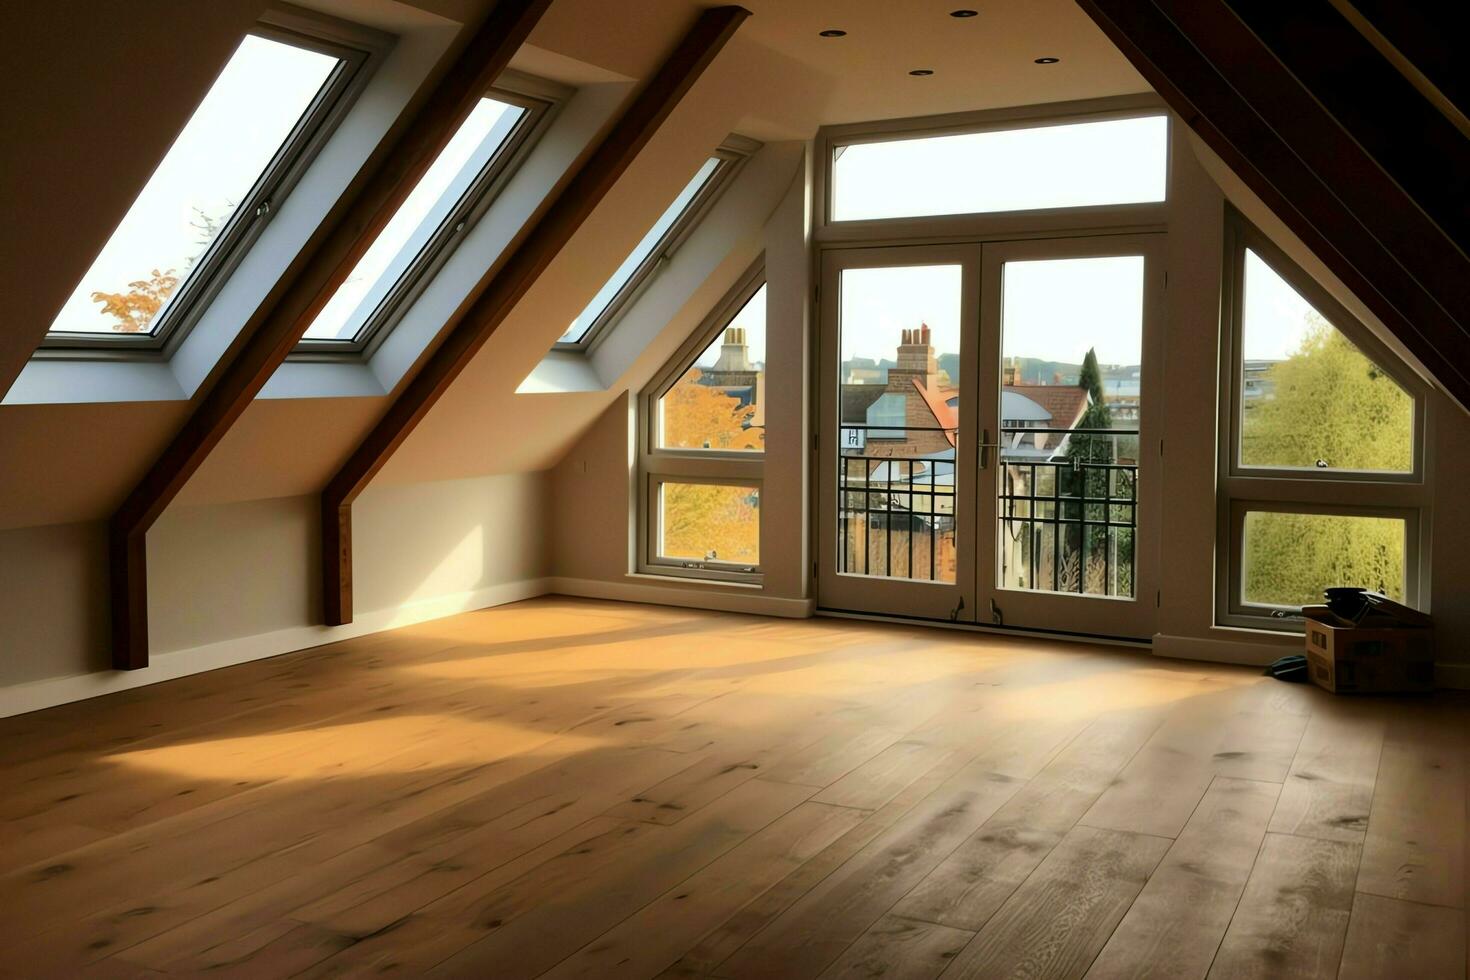 Modern dormer loft conversion interior design in apartment or house at UK. Luxury triangle attic room concept by AI Generated photo